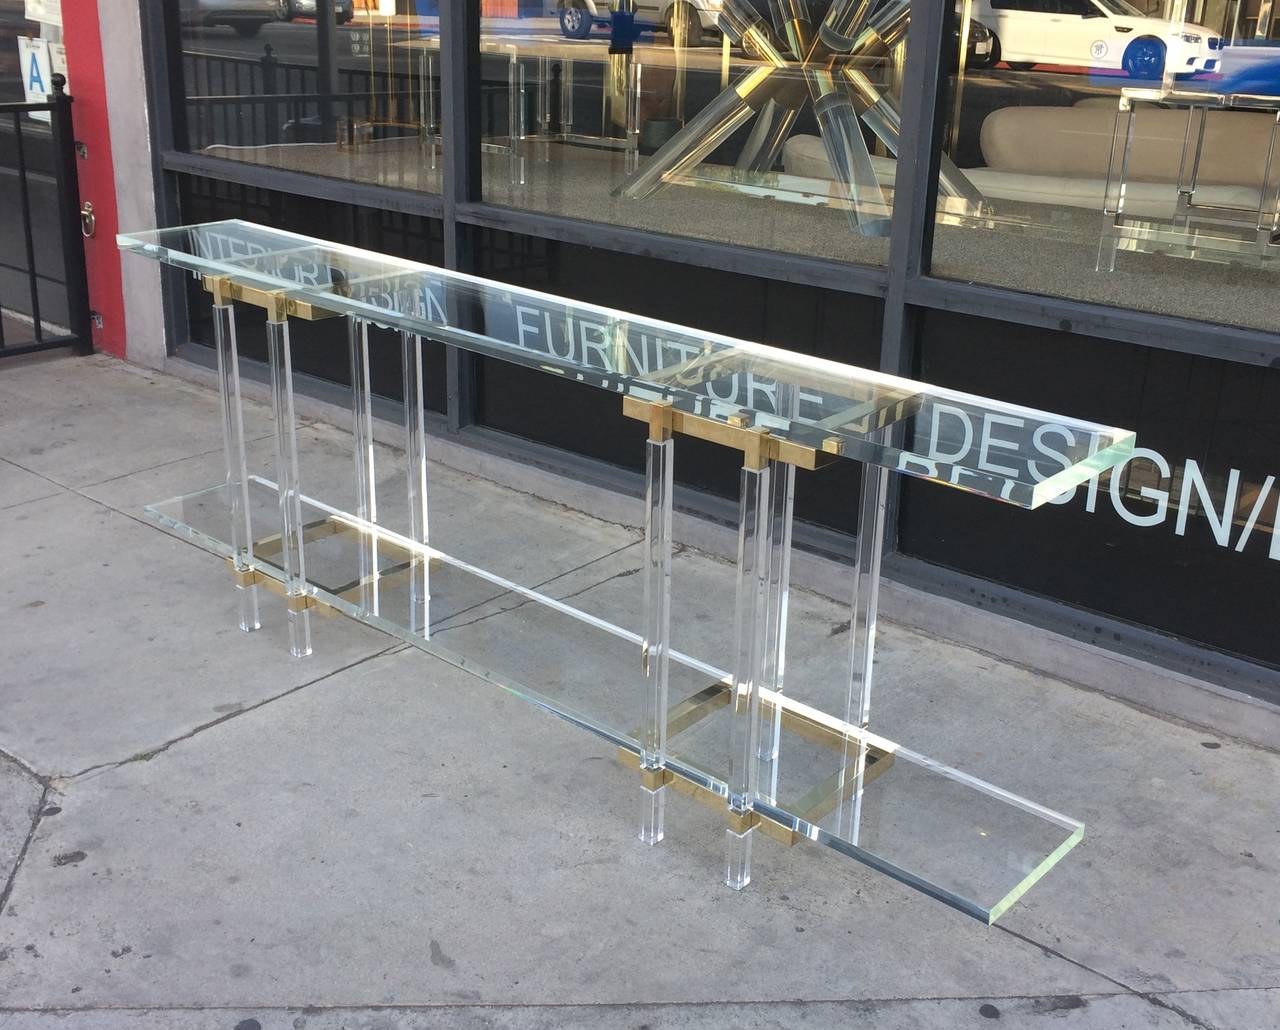 1960s design executed in brass and Lucite long and narrow console table designed and manufactured by Charles Hollis Jones in Los Angeles California.
The table is part of is 